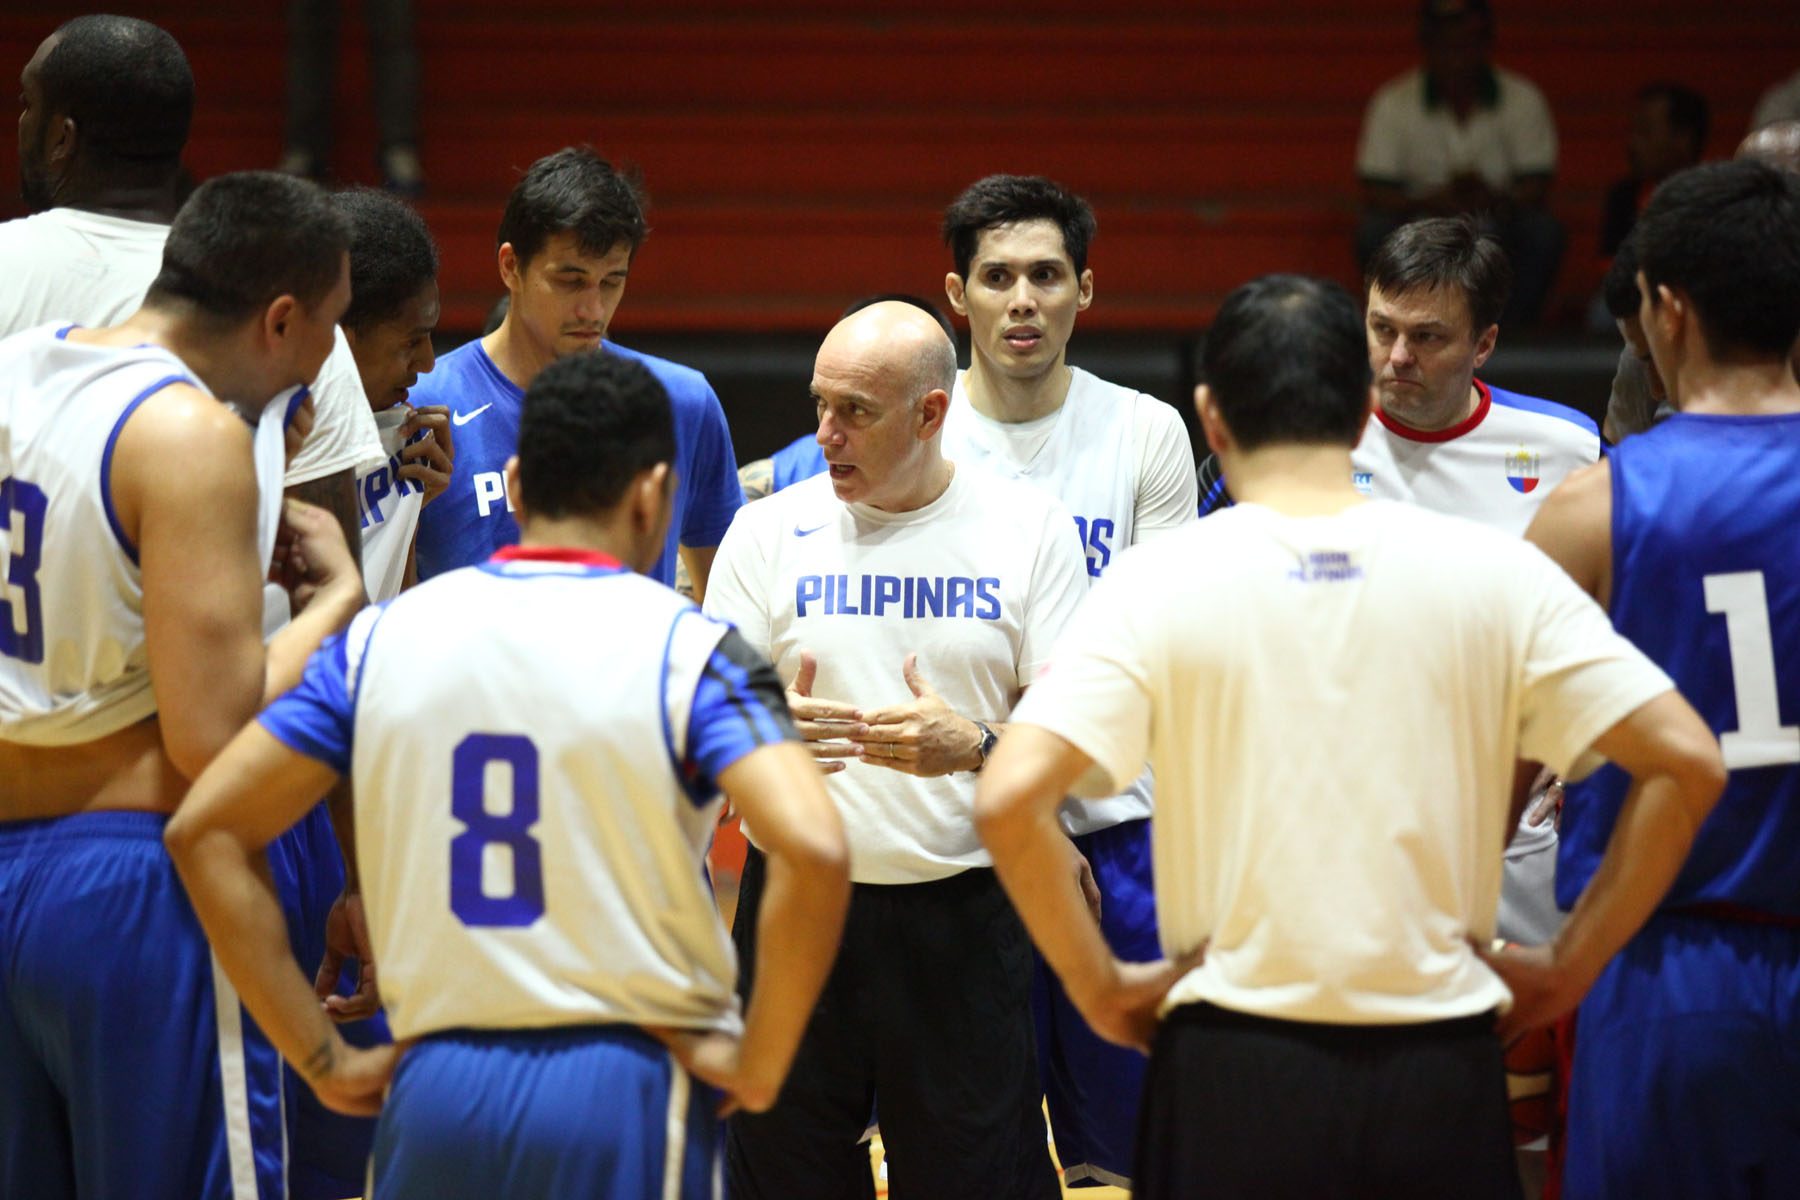 Baldwin notes Gilas progress: ‘Now we know who we are’